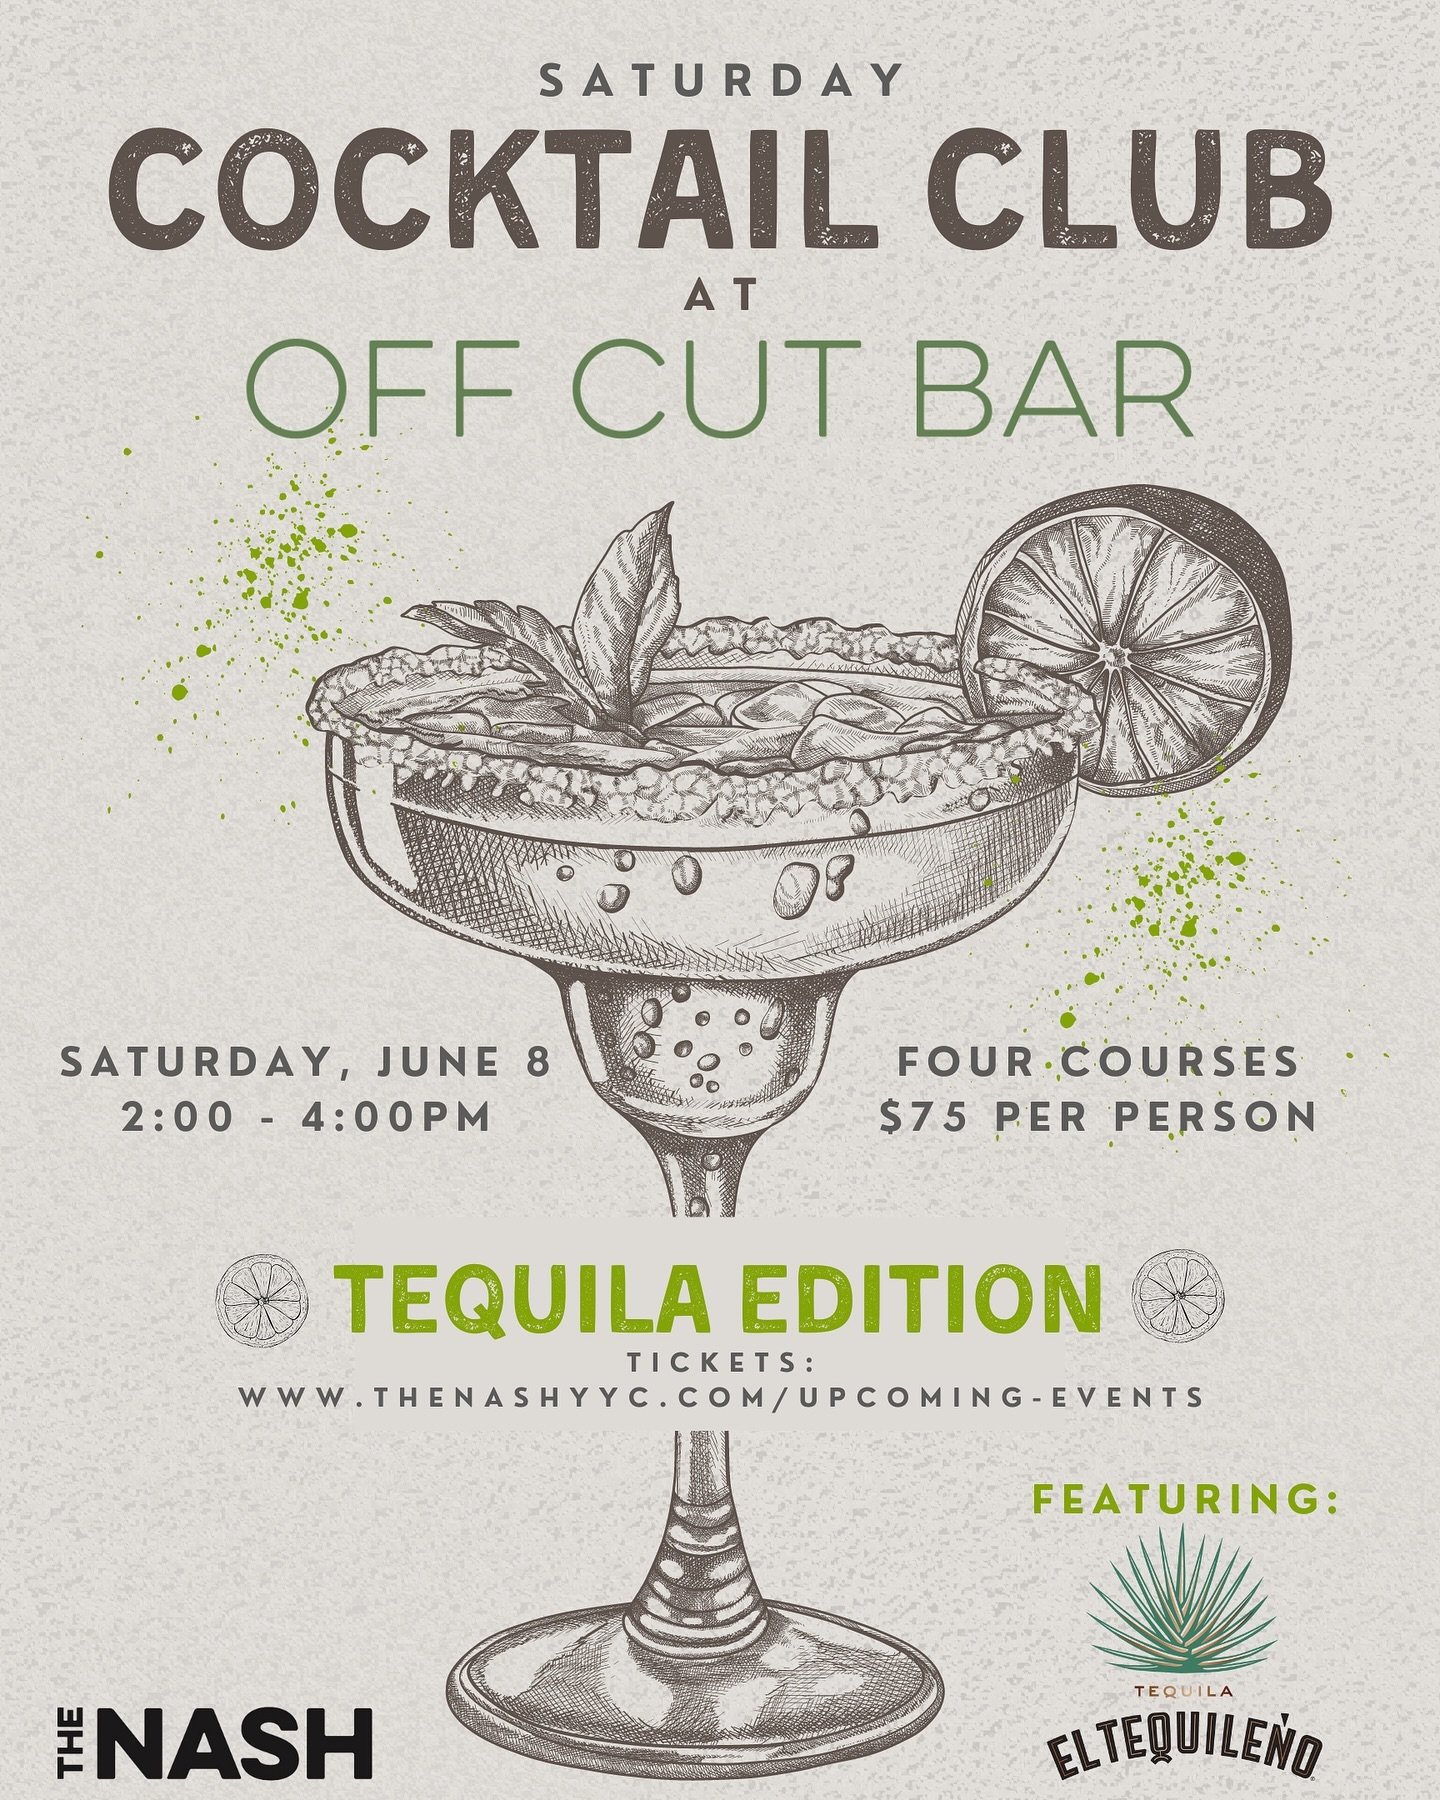 Our first ever Saturday Cocktail Club @offcutbar was an ENORMOUS success, so get ready for round two!

Saturday, June 8th we team up with @el_tequileno for the Saturday Cocktail Club tequila edition! 🍋&zwj;🟩 

Four creative tequila cocktails curate